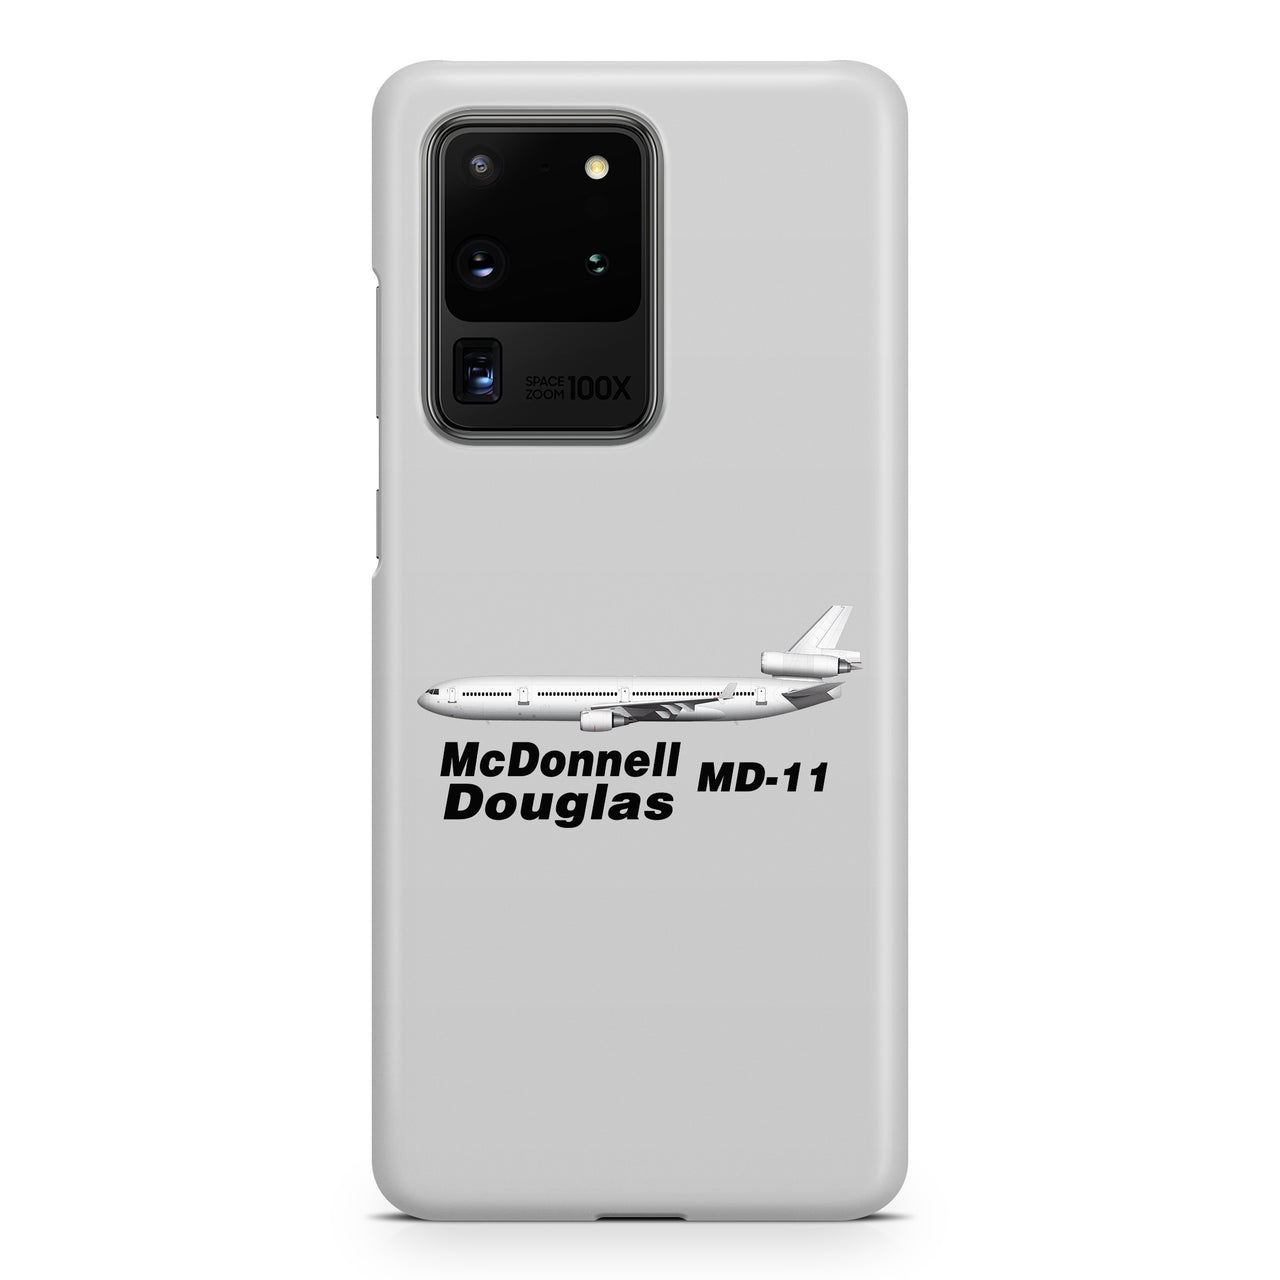 The McDonnell Douglas MD-11 Samsung A Cases